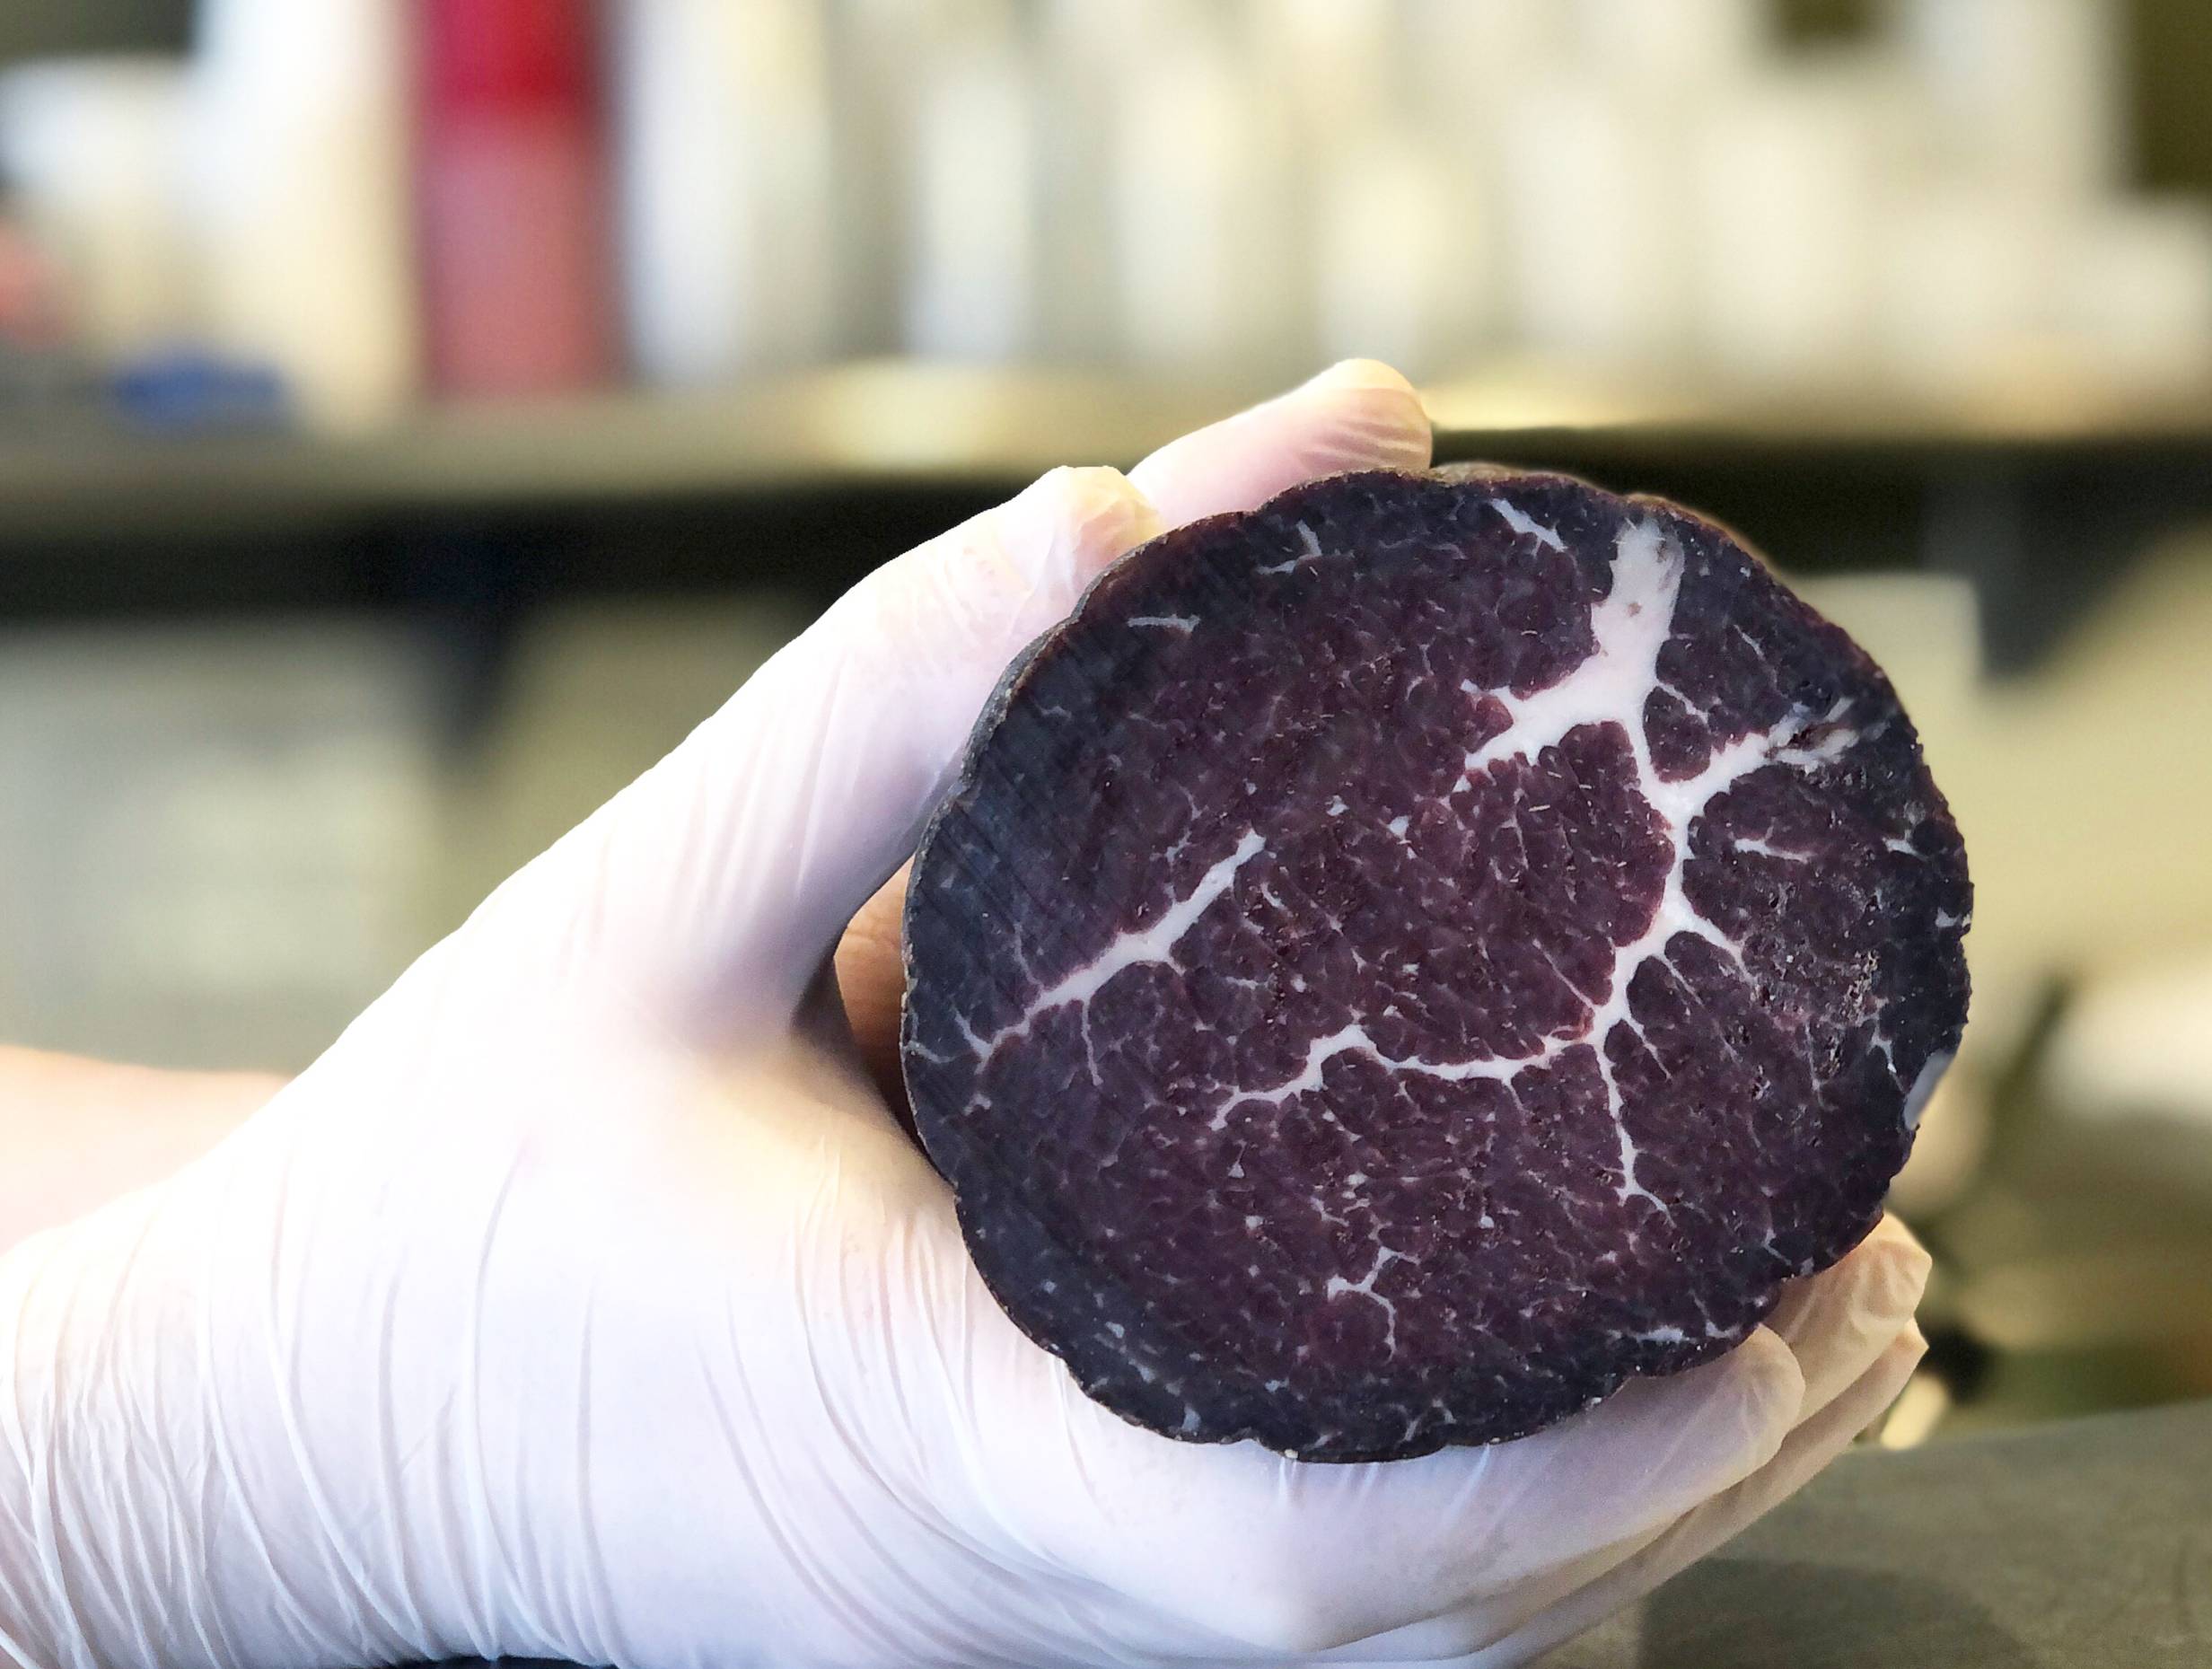 Two gloved hands hold up a deli meat sausage of bresaola salumi showing the circular shape and deep purple color. Photo by Alyssa Buckley.